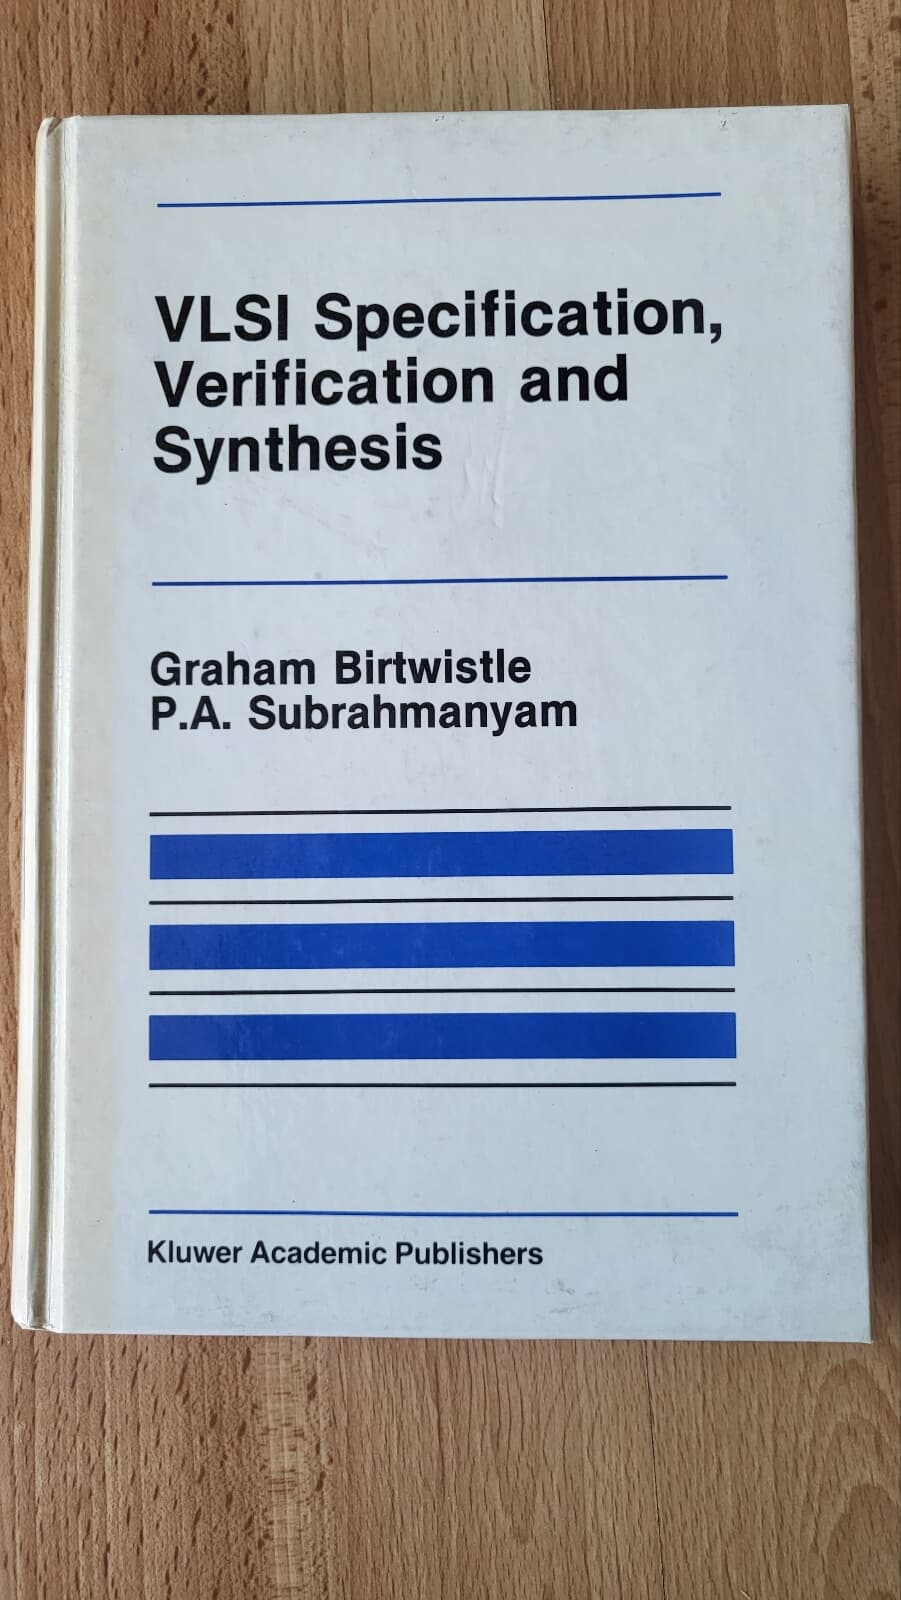 VLSI Specification, Verification and Synthesis